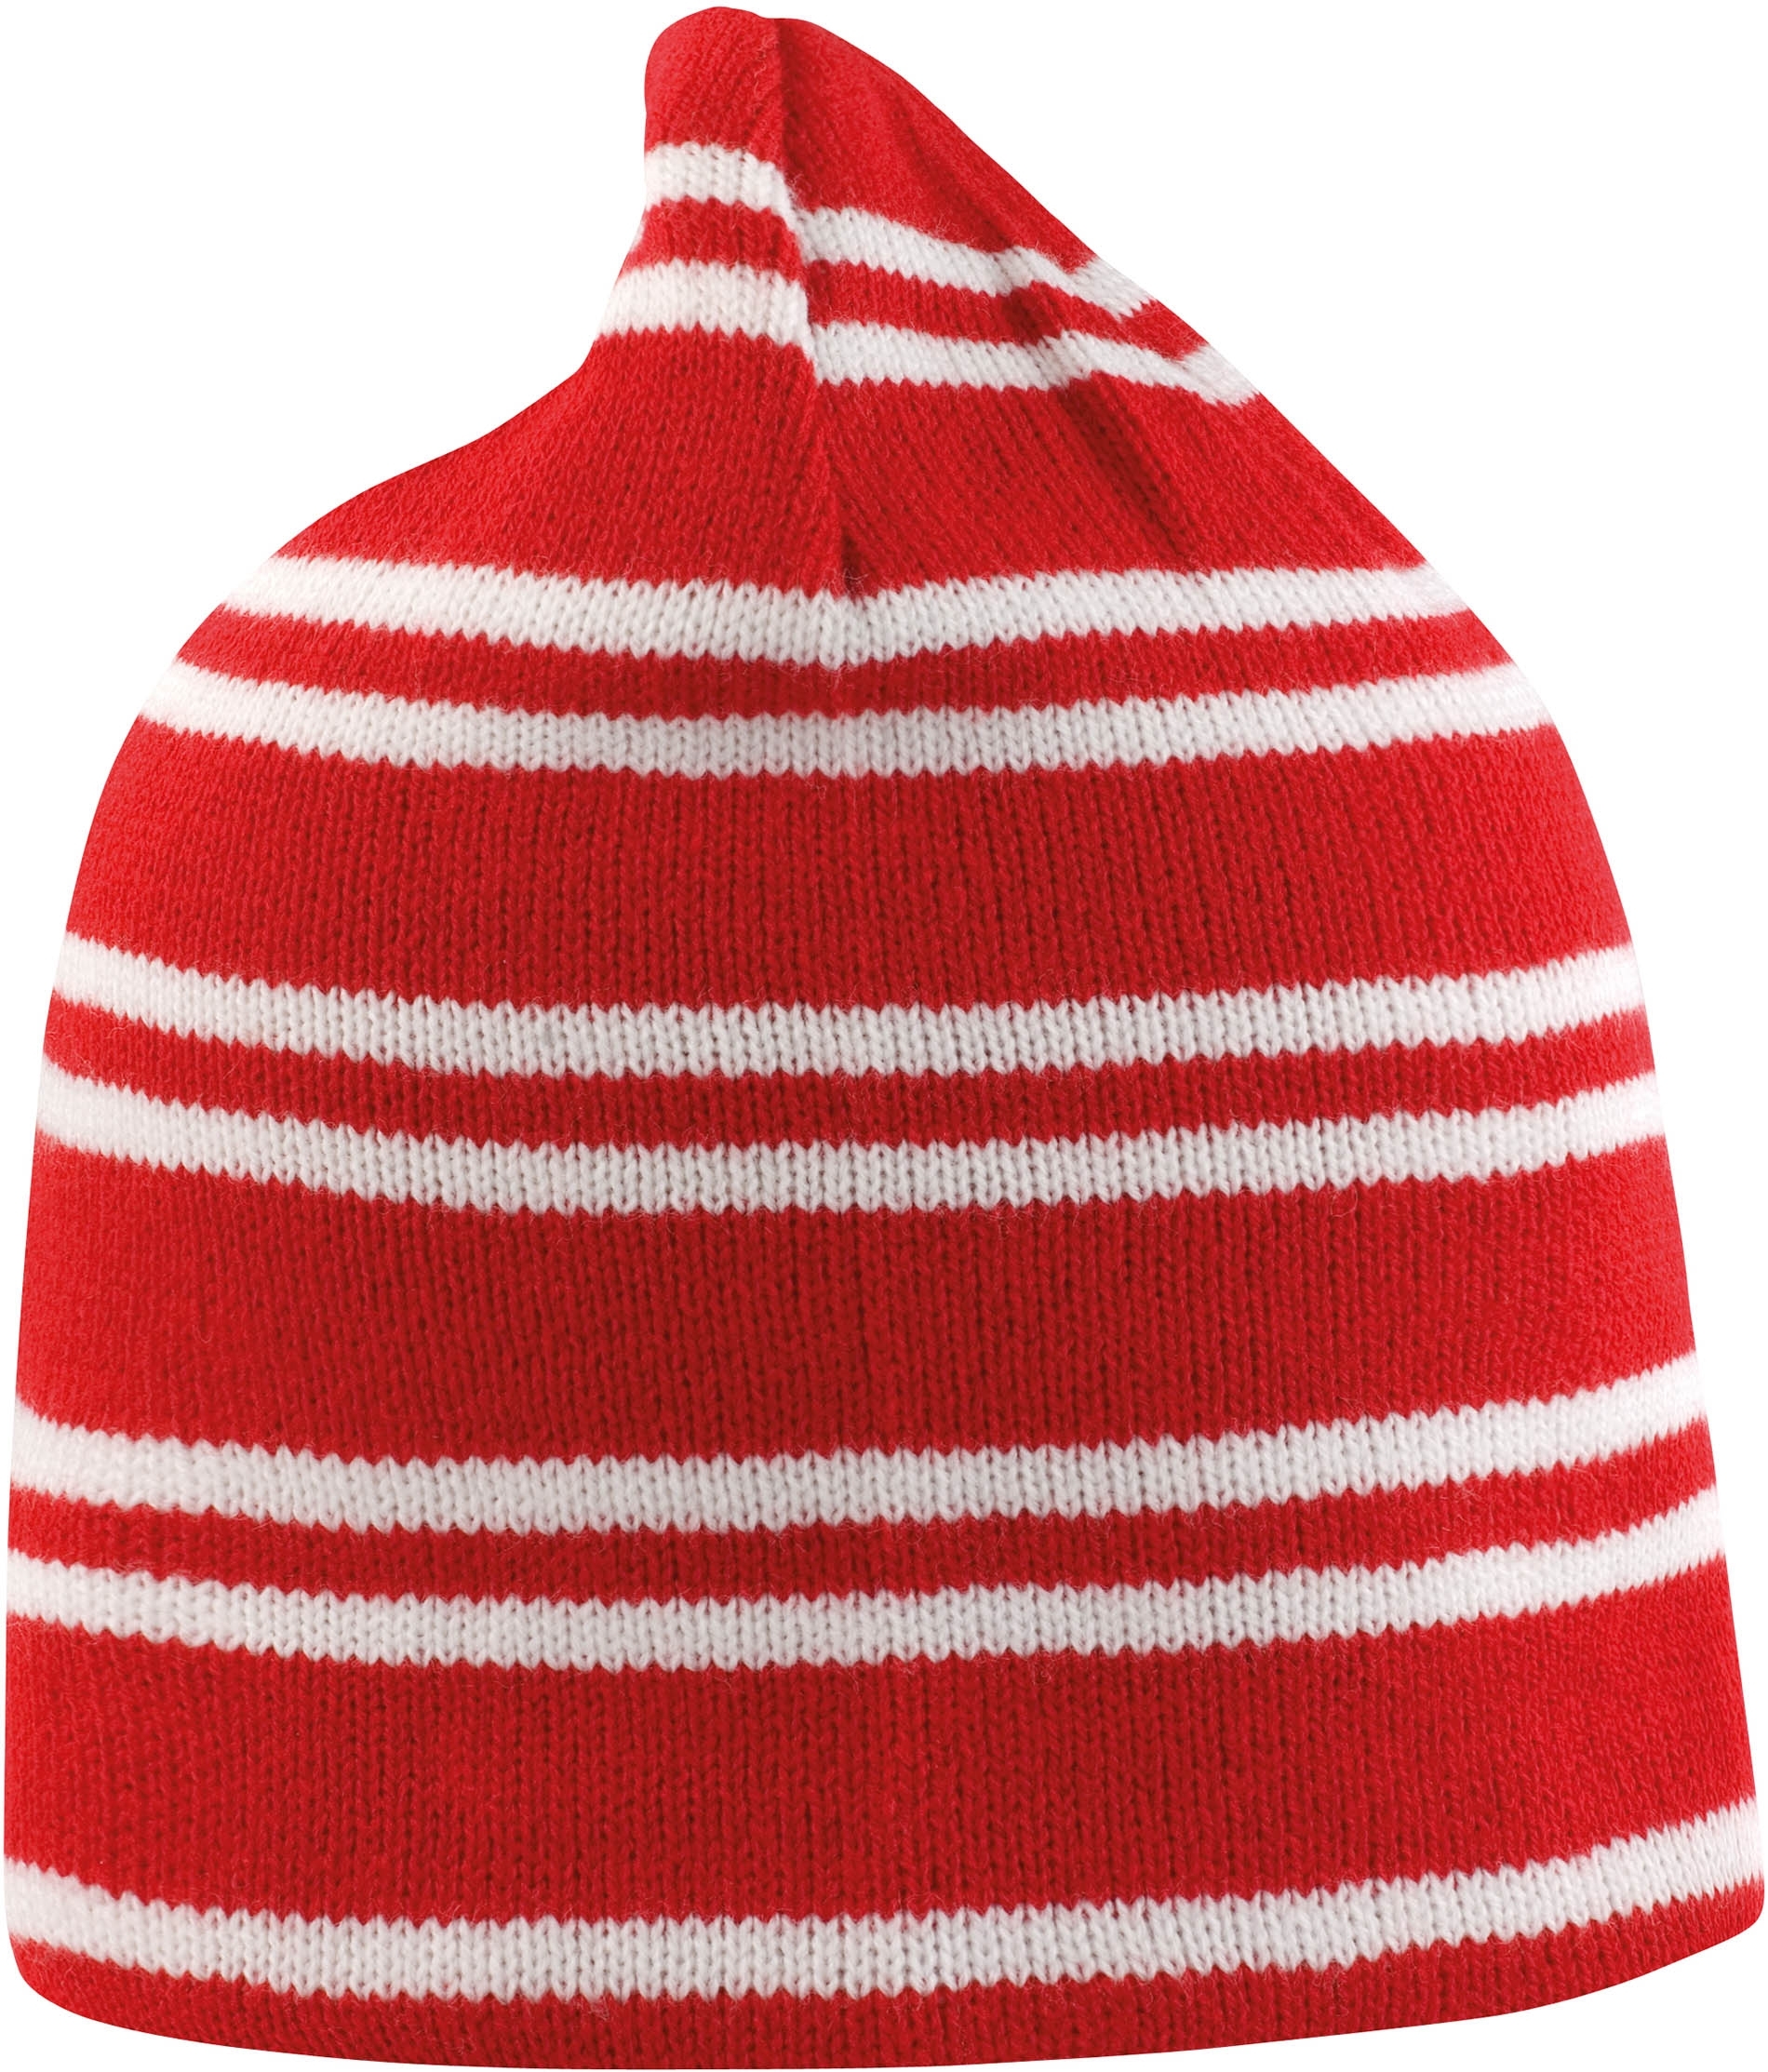 Bonnet réversible Team Red / White / Red Rouge